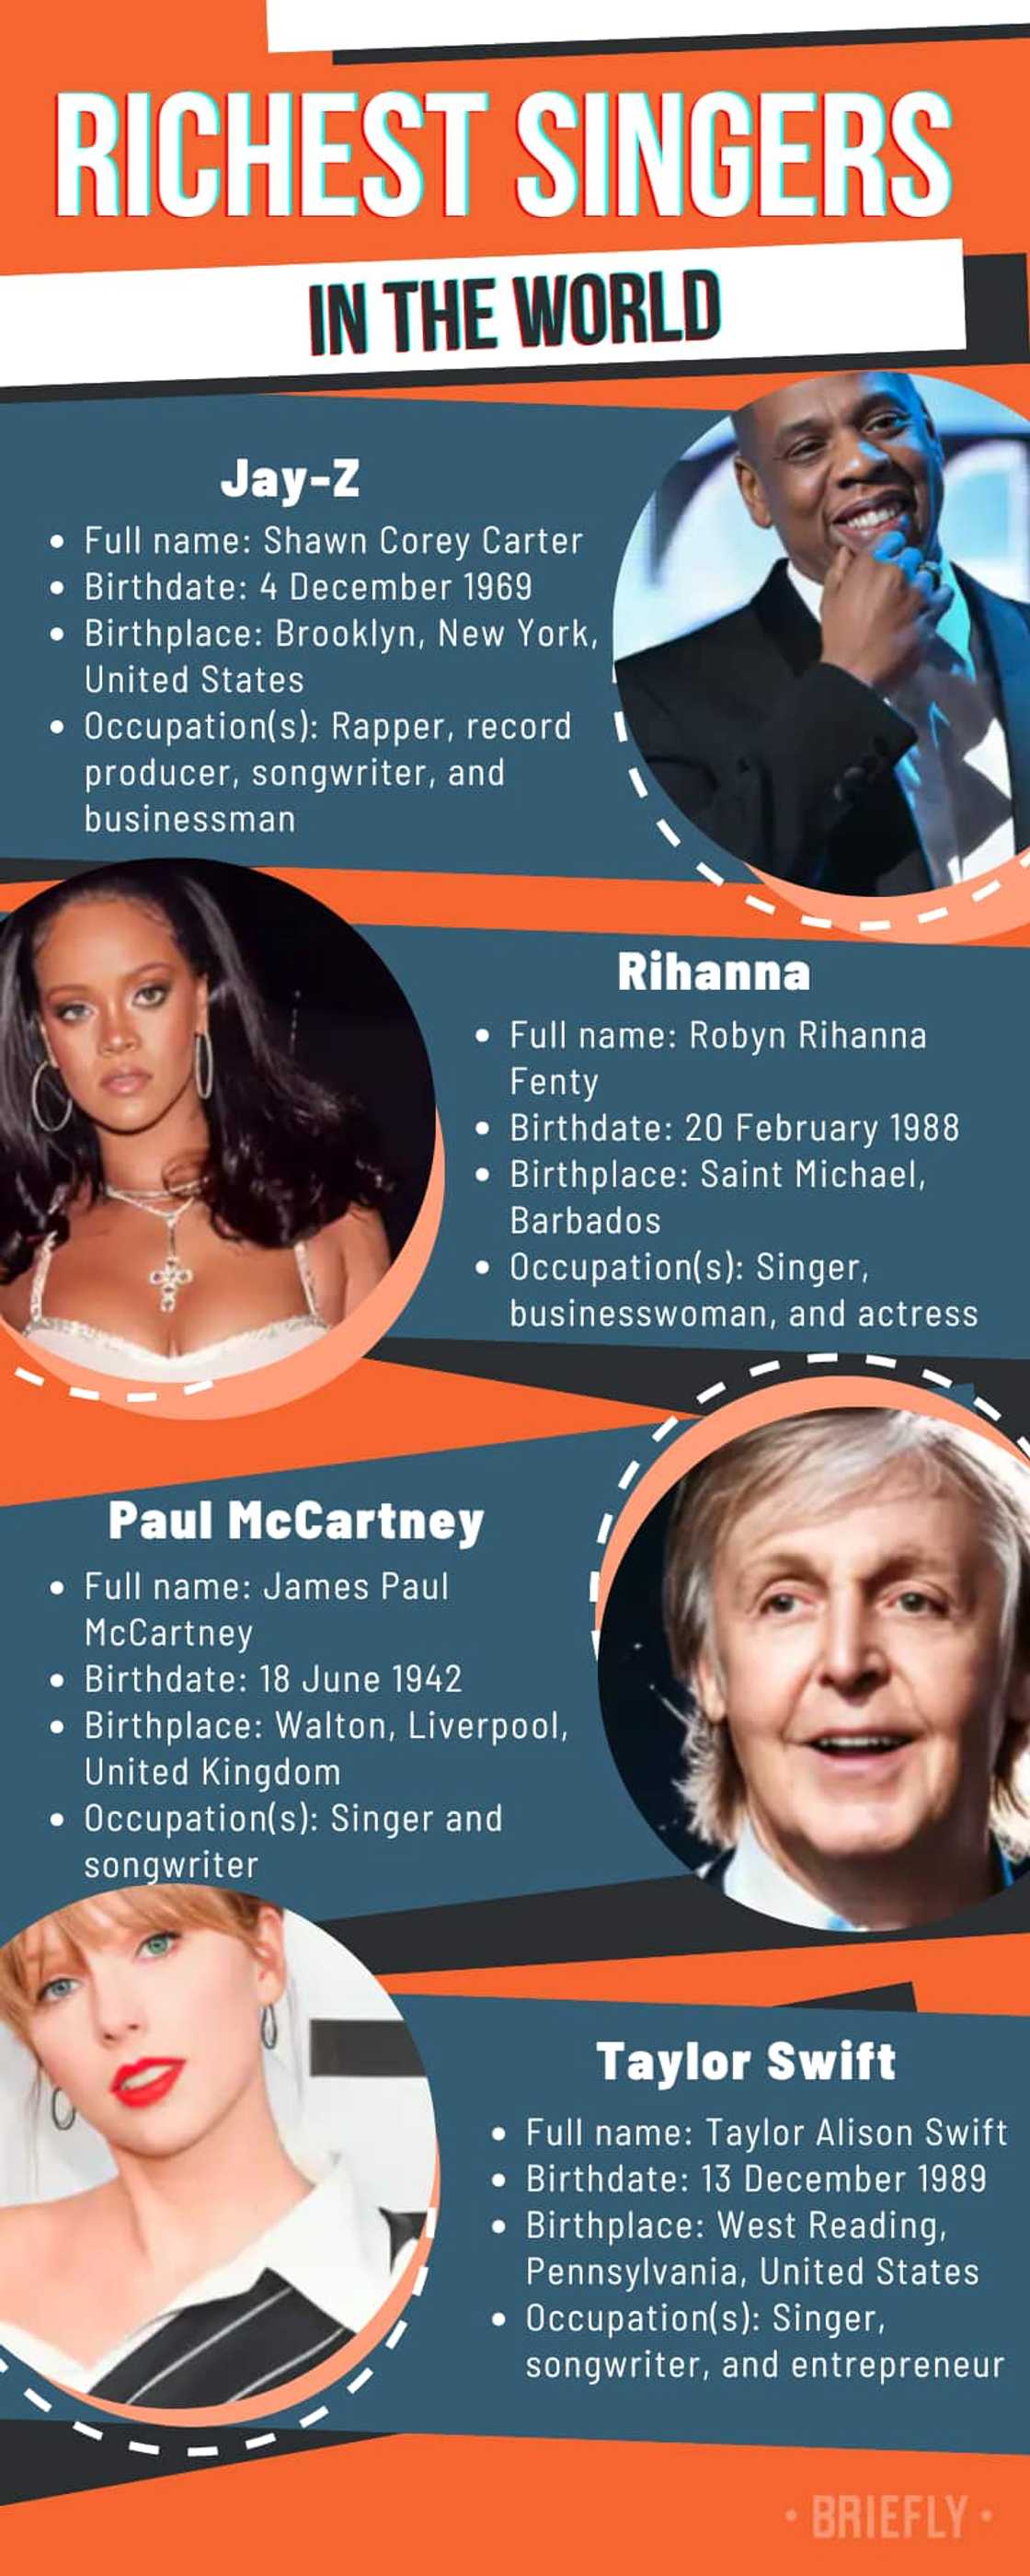 Richest singers in the world